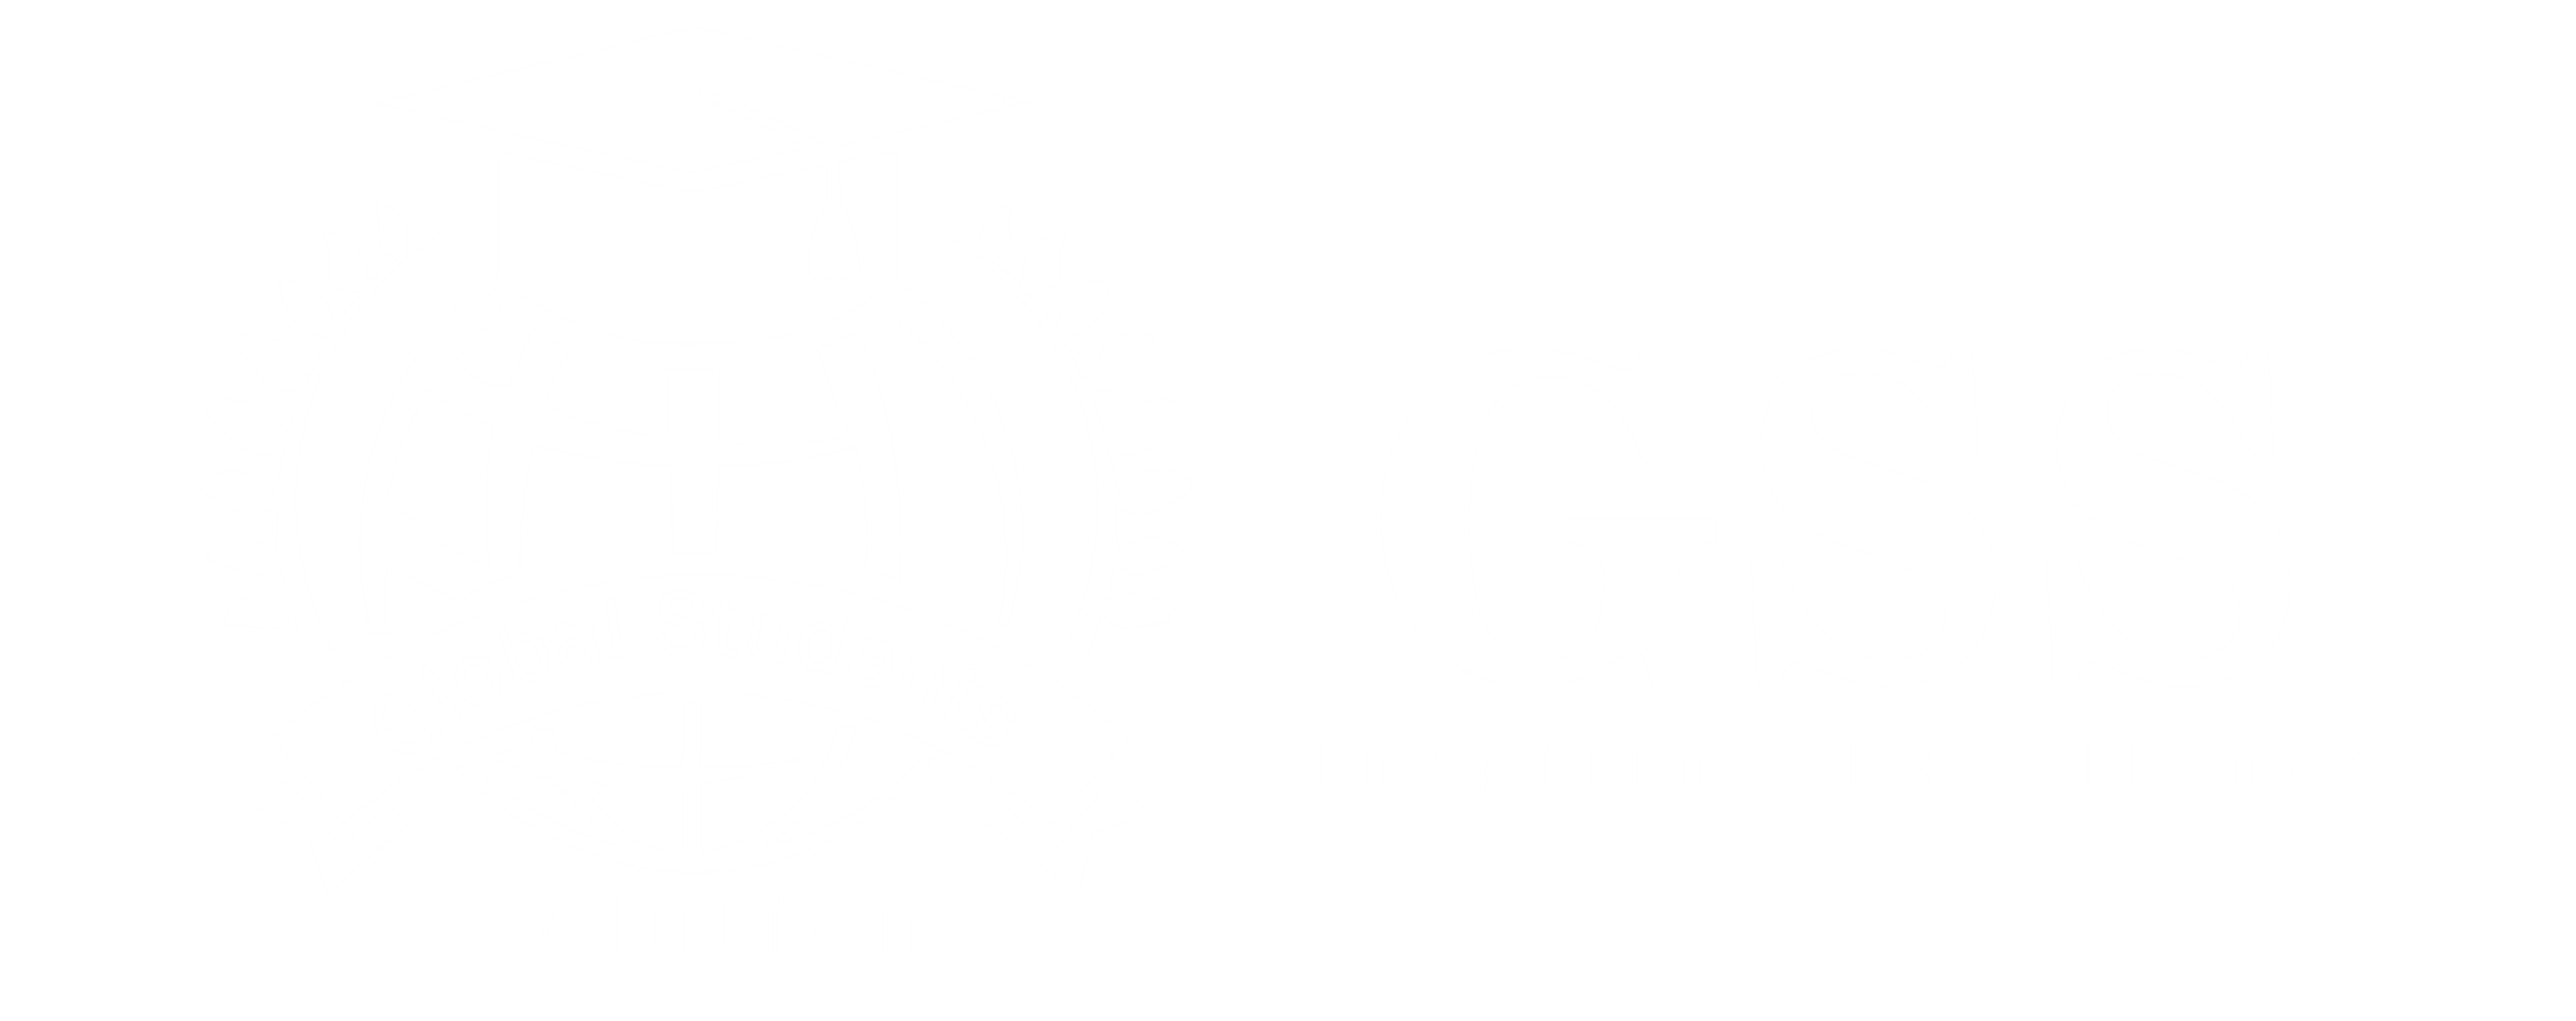 Global Students Solution